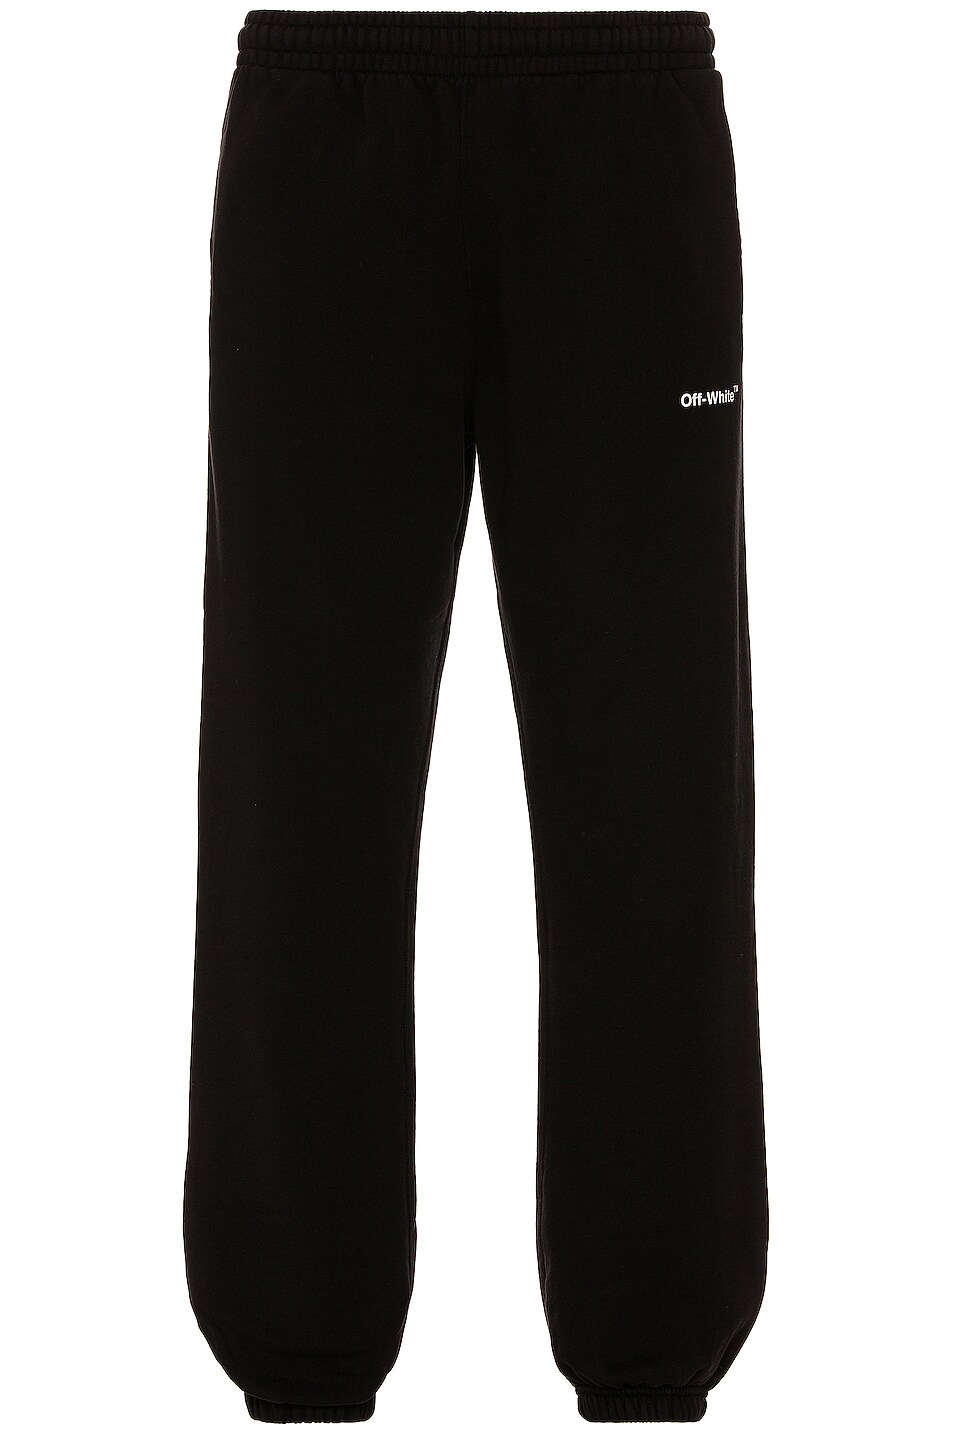 Image 1 of OFF-WHITE Diagonal Helvetica Sweatpant in Black & White